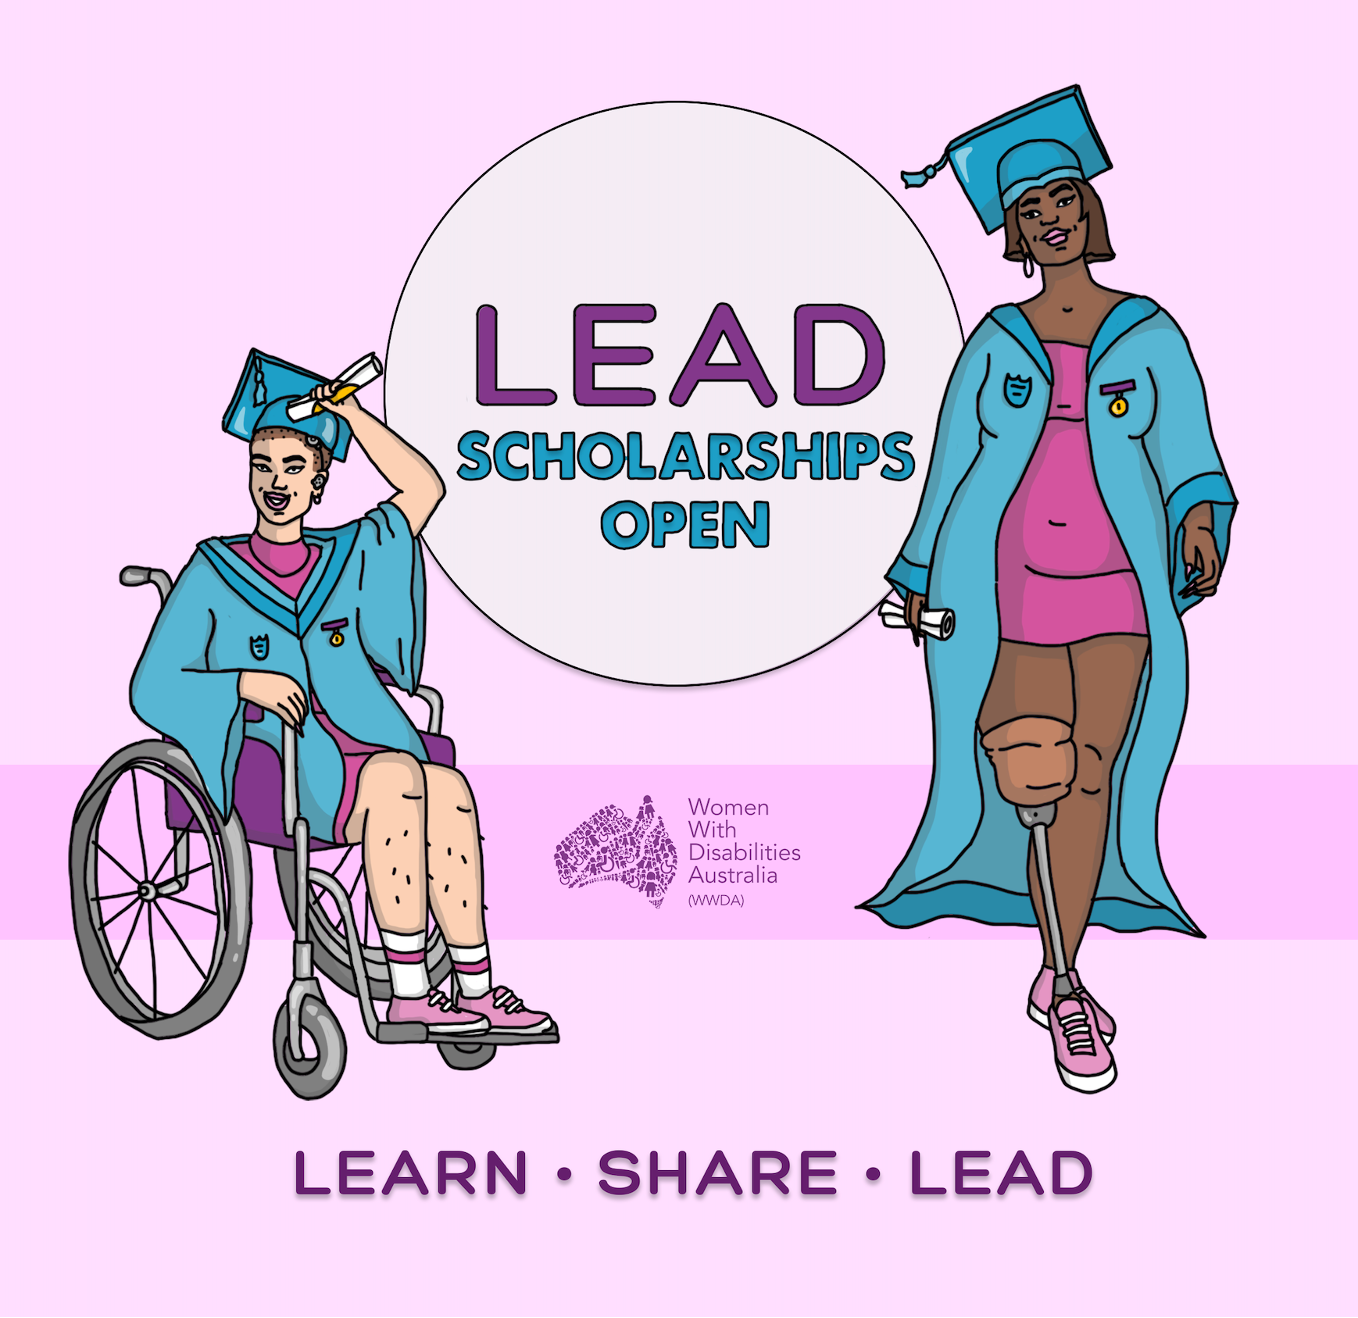 [Image: Pink square tile background. In the middle is the WWDA LEAD Scholarships logo with an illustration of two women wearing graduation gowns and hats on either side, representing disability and diversity. Text reads: 'LEAD Scholarship Open', "Learn, Share, Lead".]